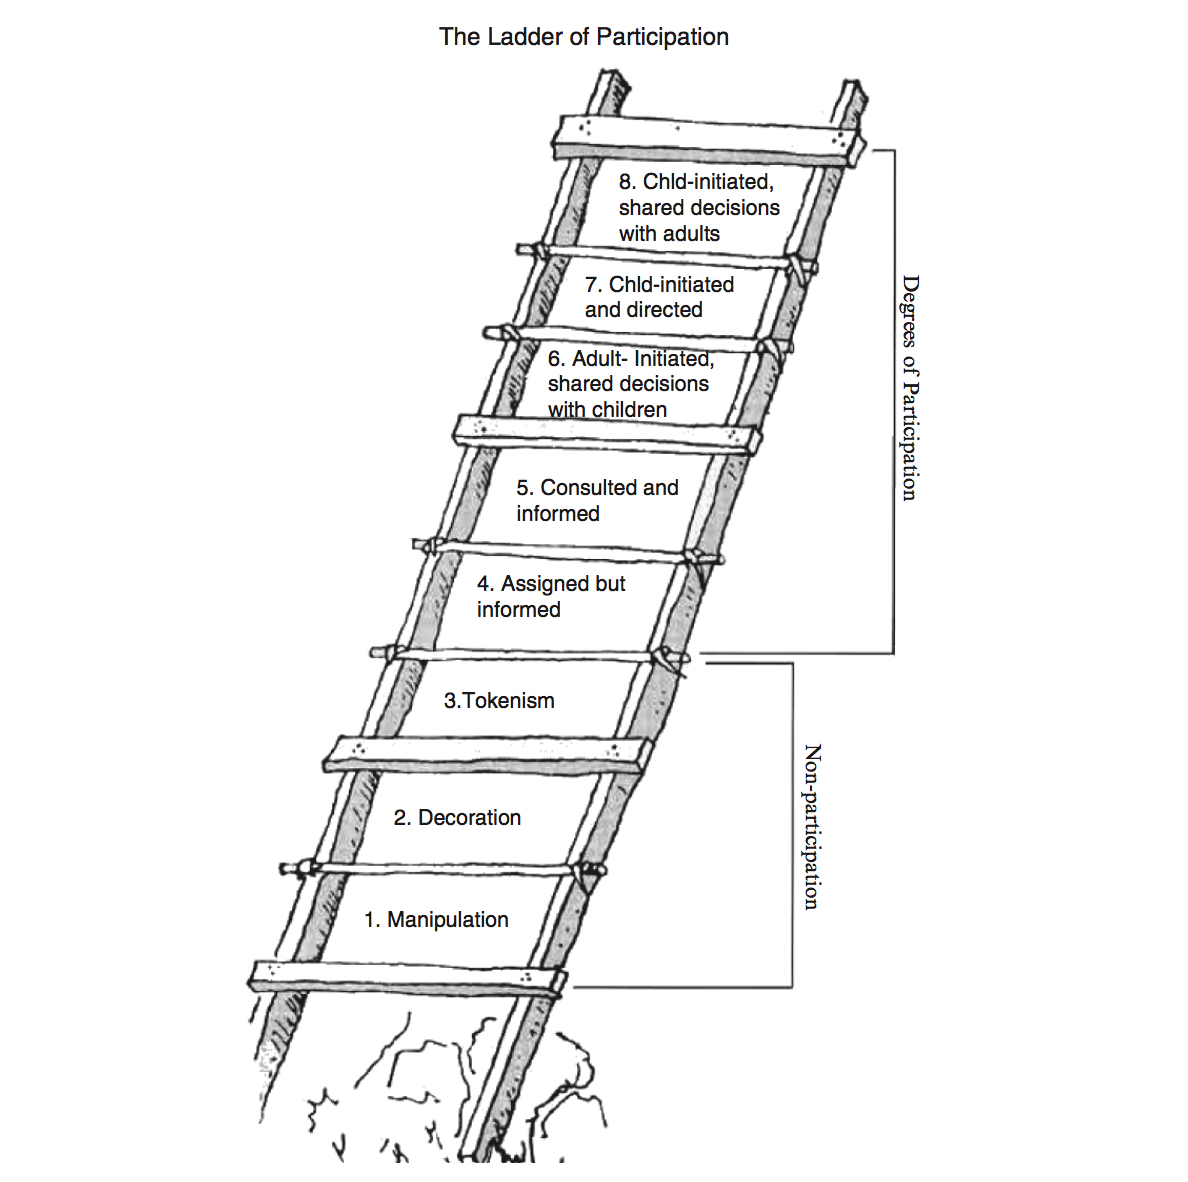 Roger Hart’s original 1992 illustration of the Ladder of Children’s Participation from Children’s Participation: From Tokenism to Citizenship.